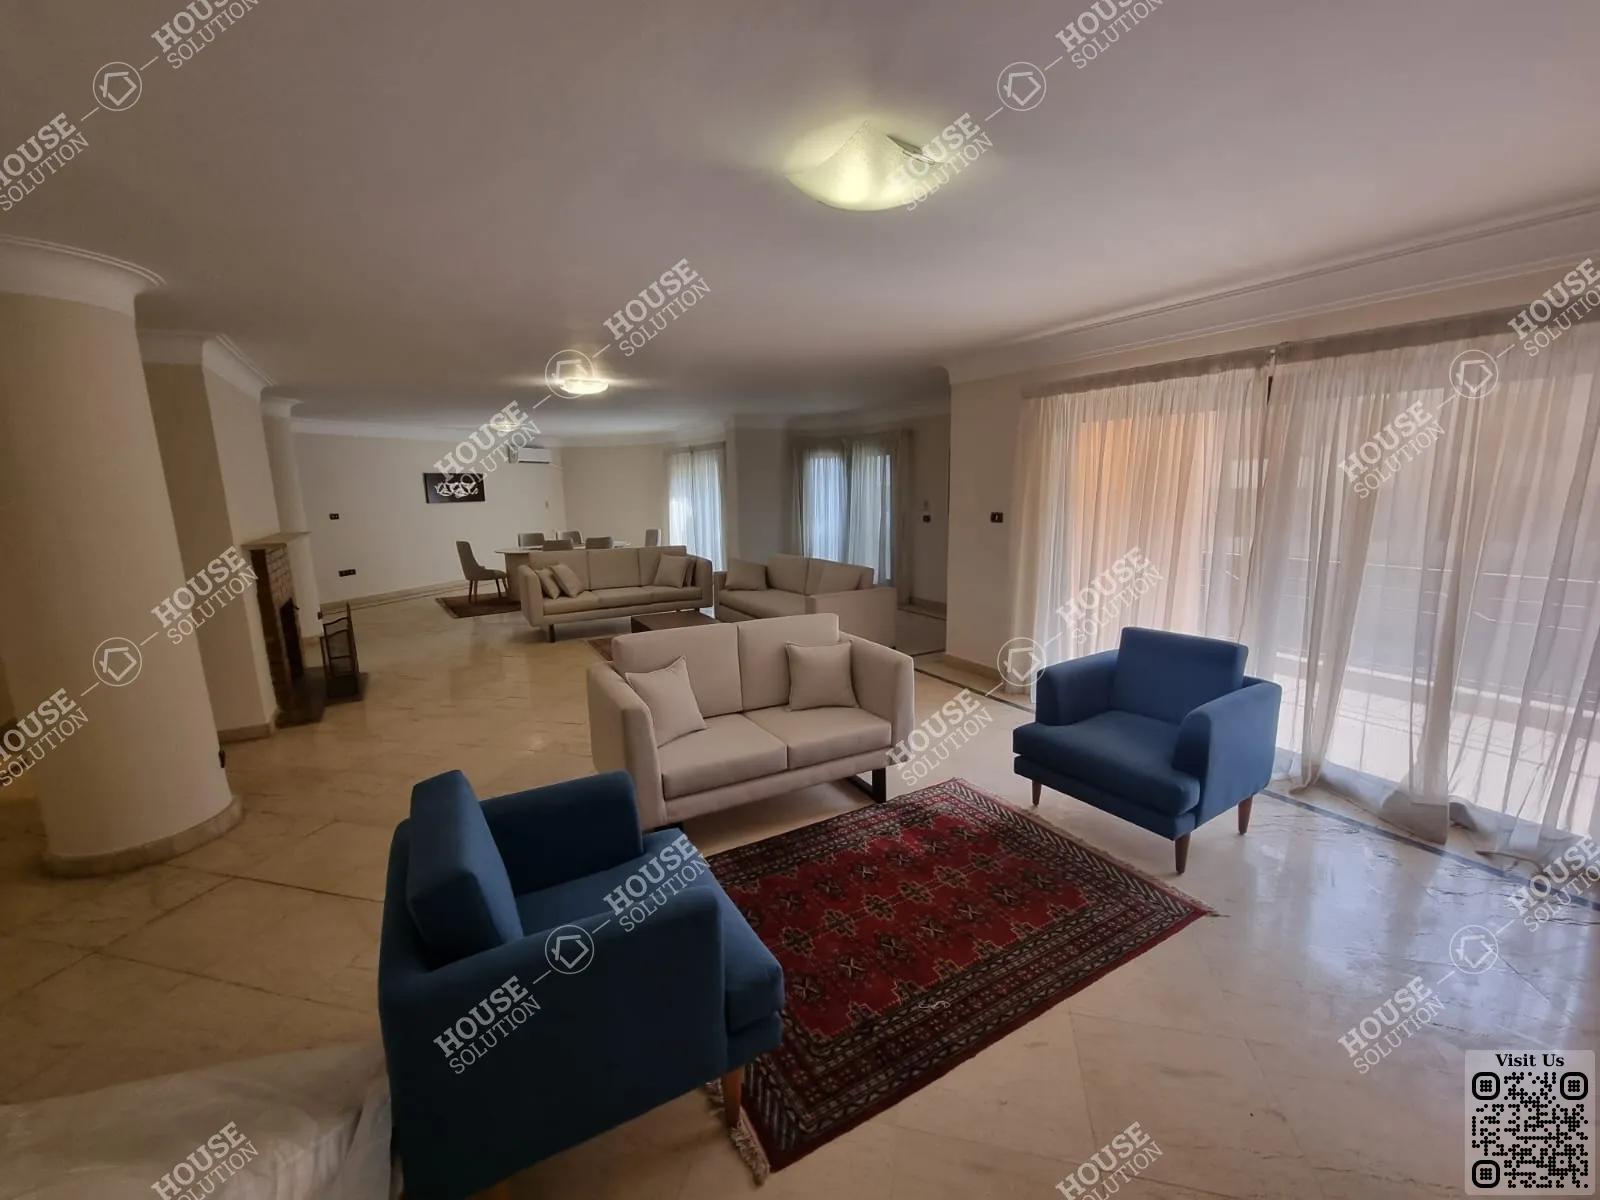 RECEPTION  @ Apartments For Rent In Maadi Maadi Sarayat Area: 300 m² consists of 4 Bedrooms 3 Bathrooms Furnished 5 stars #5361-0